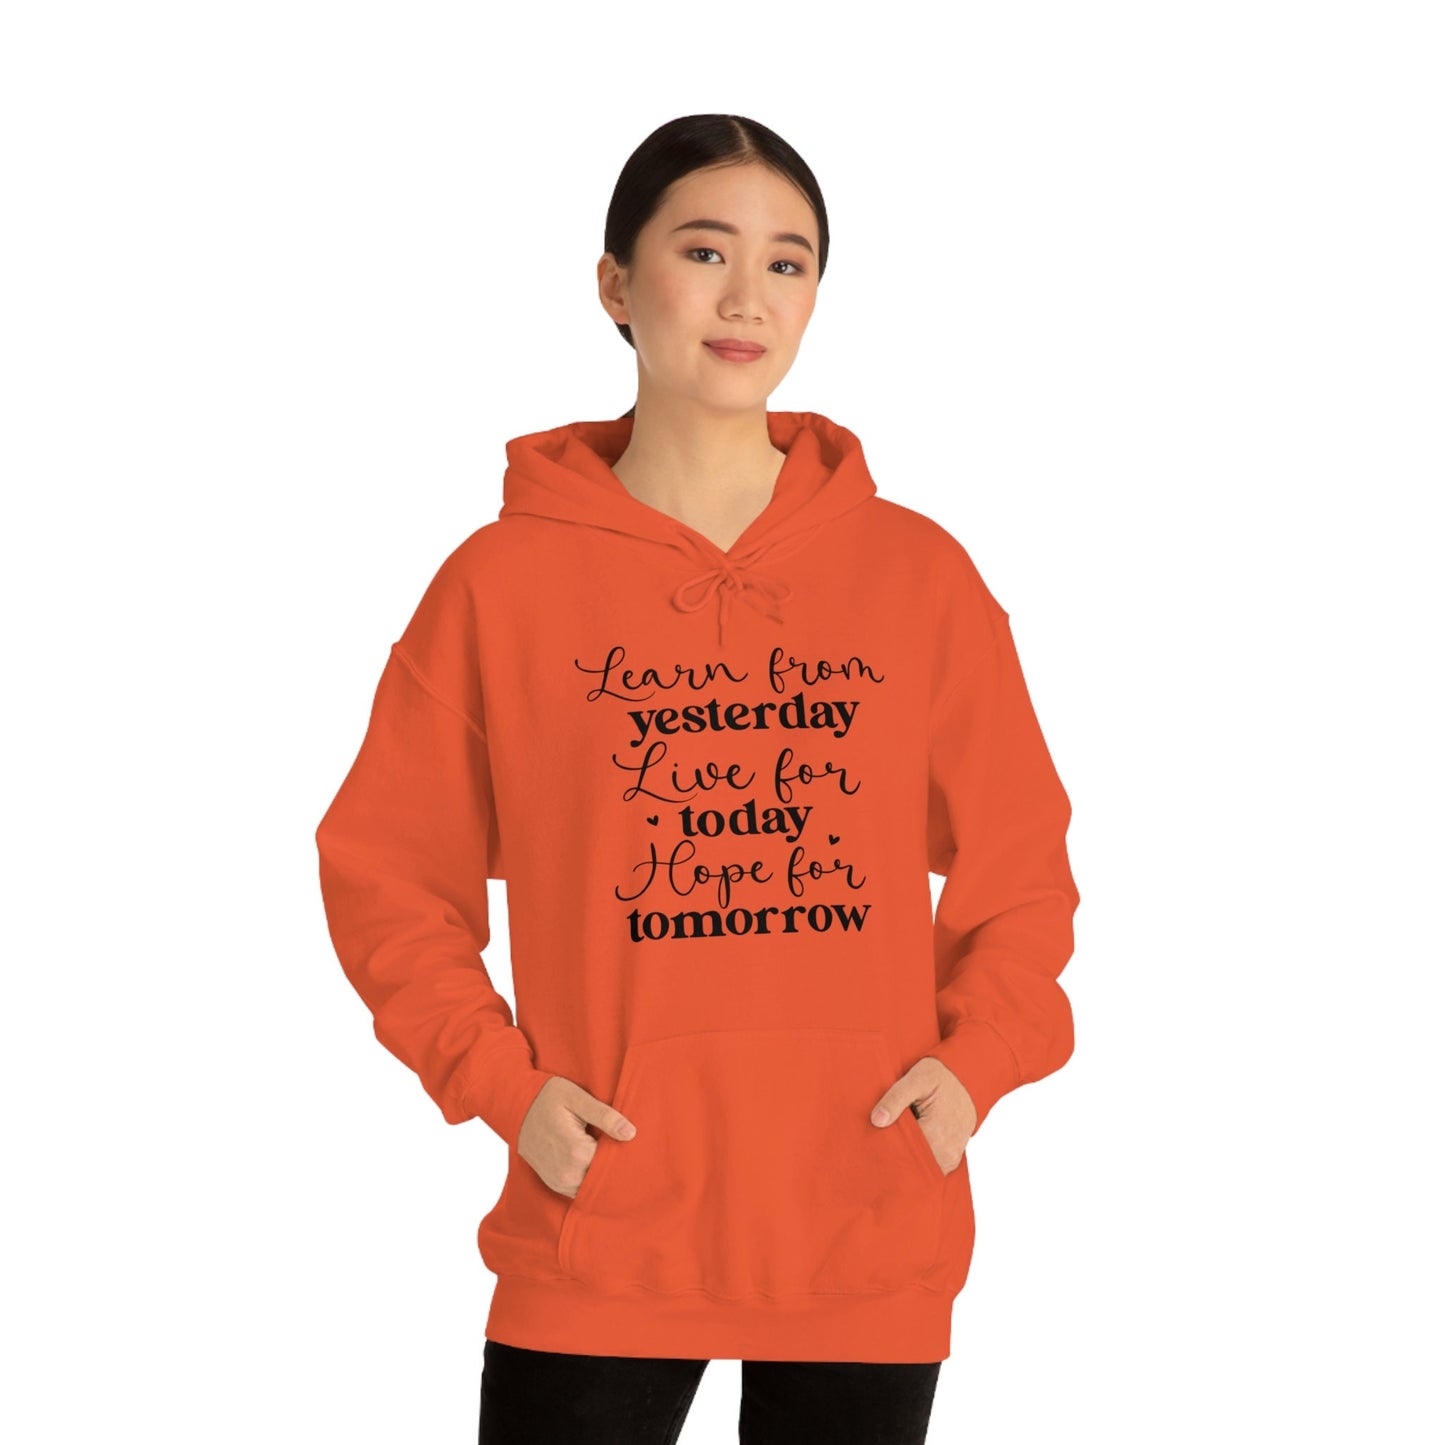 Unisex Heavy Blend Hooded Sweatshirt - Learn from Yesterday, Live for Today, Hope for Tomorrow